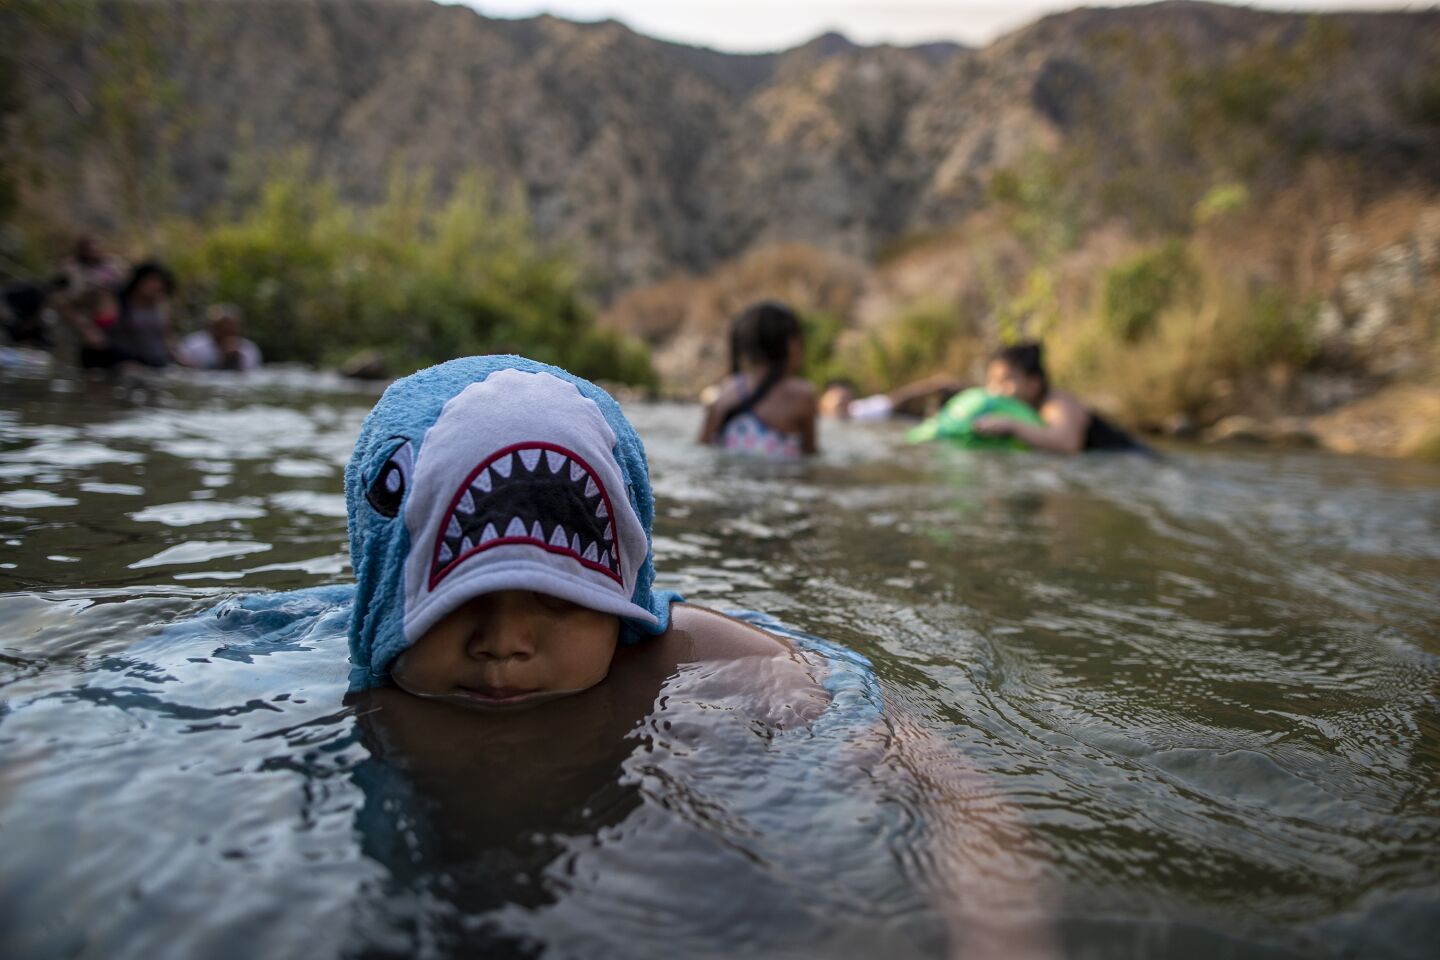 Matthew Giron, 8, frolics with friends and family near a drainage pipe along the San Gabriel River.